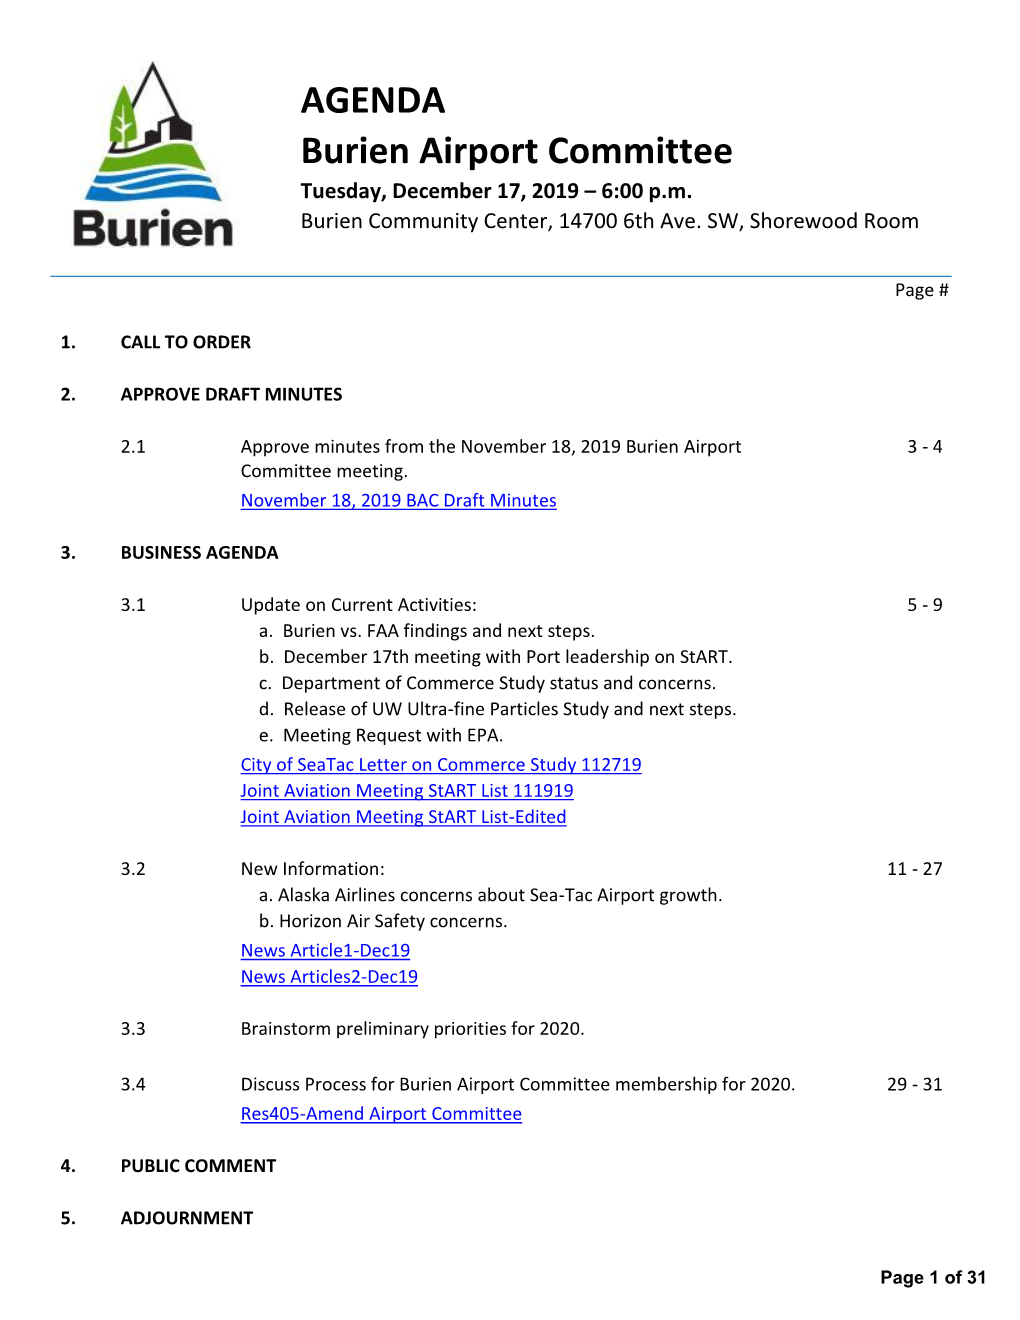 Burien Airport Committee Tuesday, December 17, 2019 – 6:00 P.M